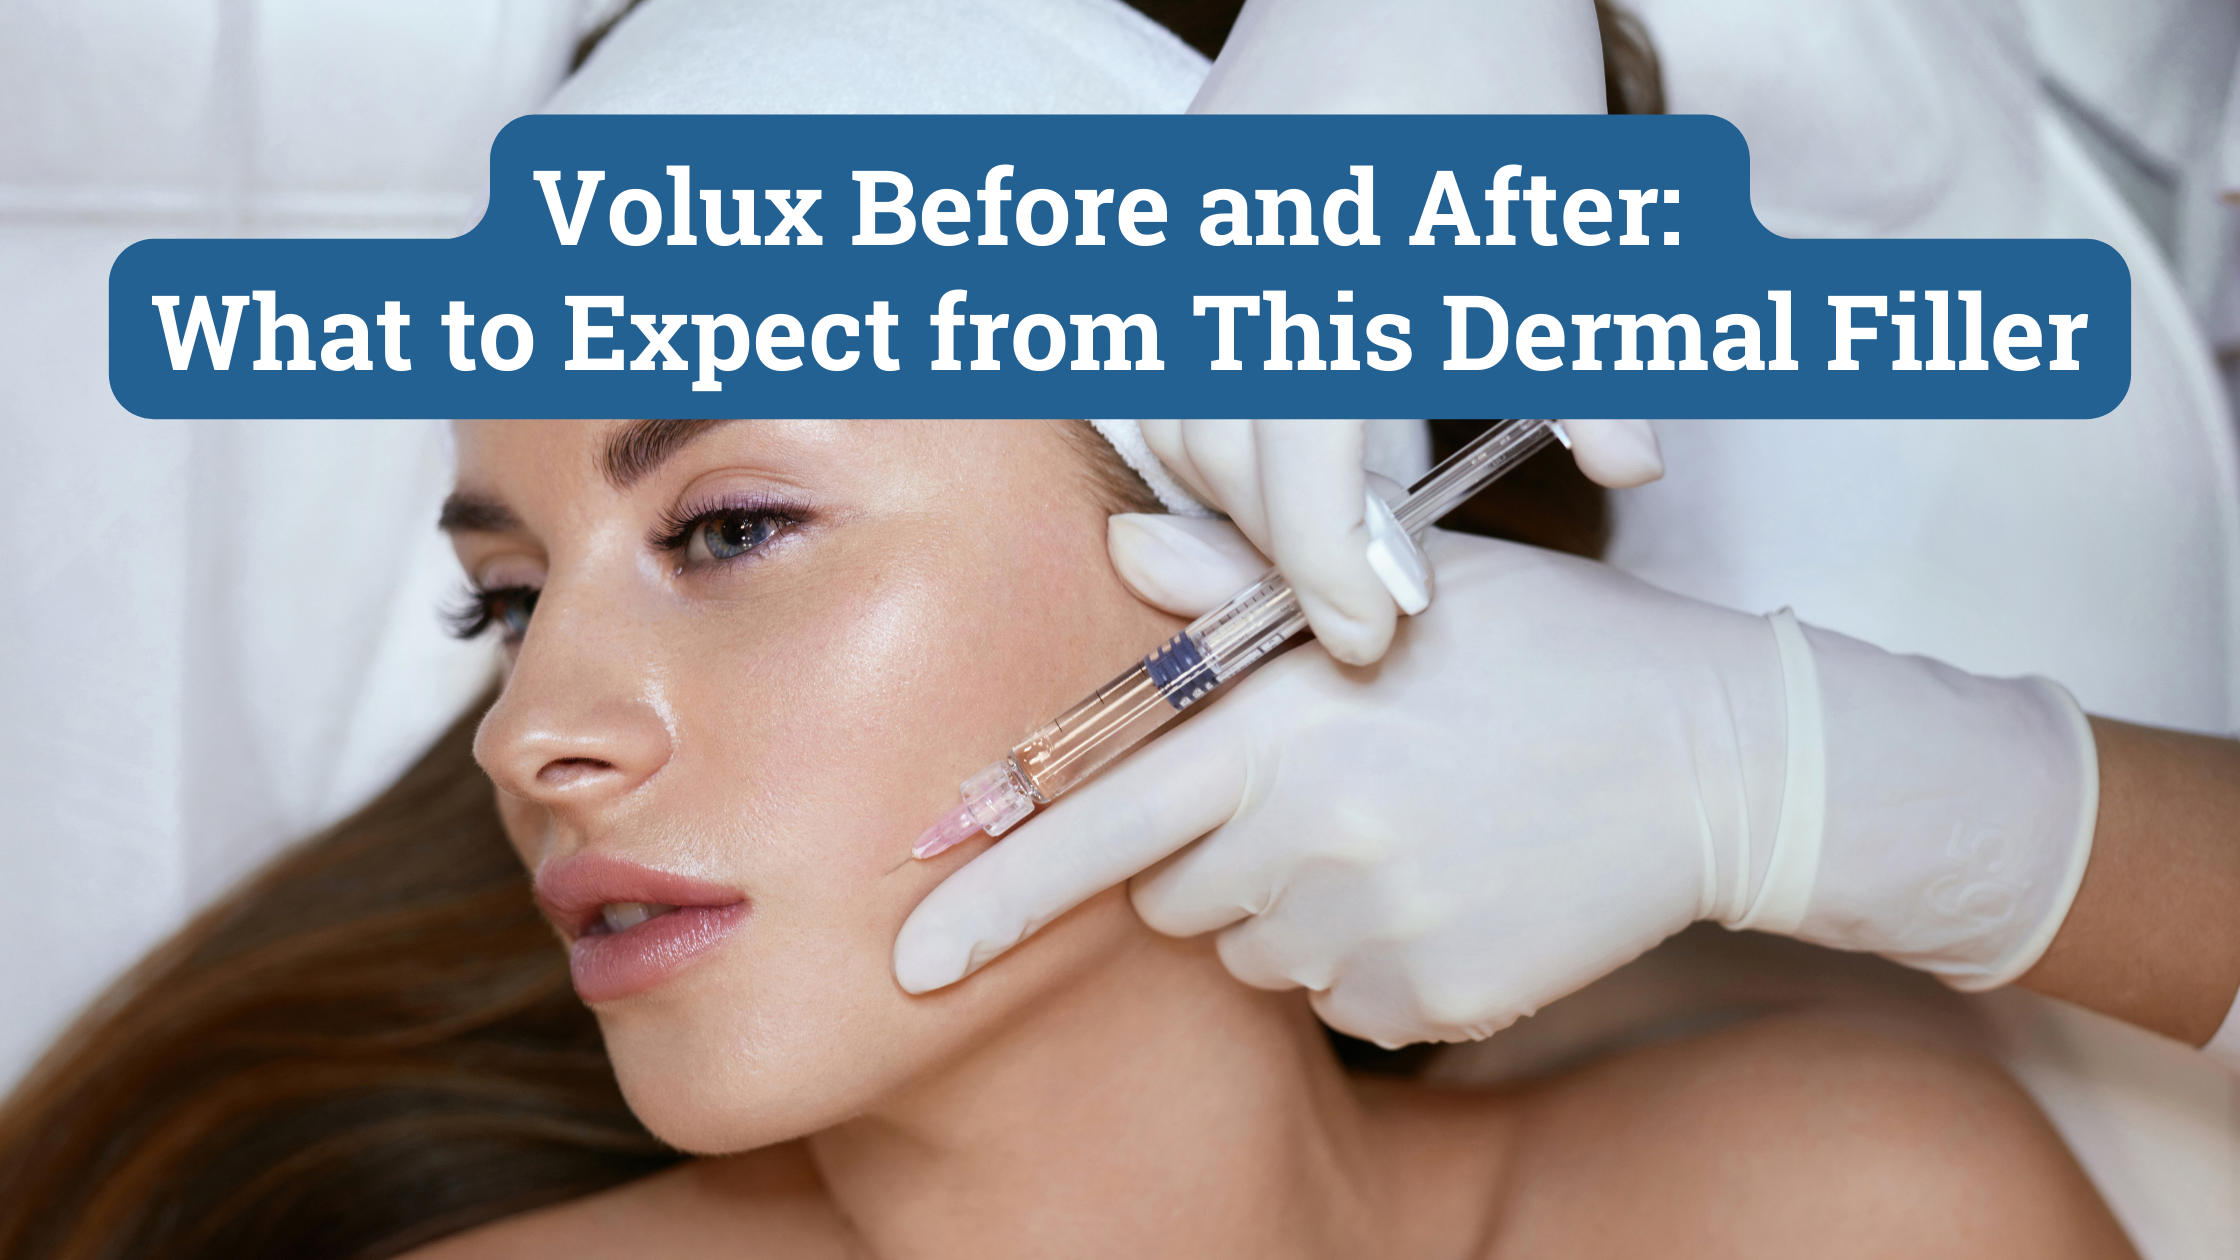 Volux Before and After: What to Expect from This Dermal Filler